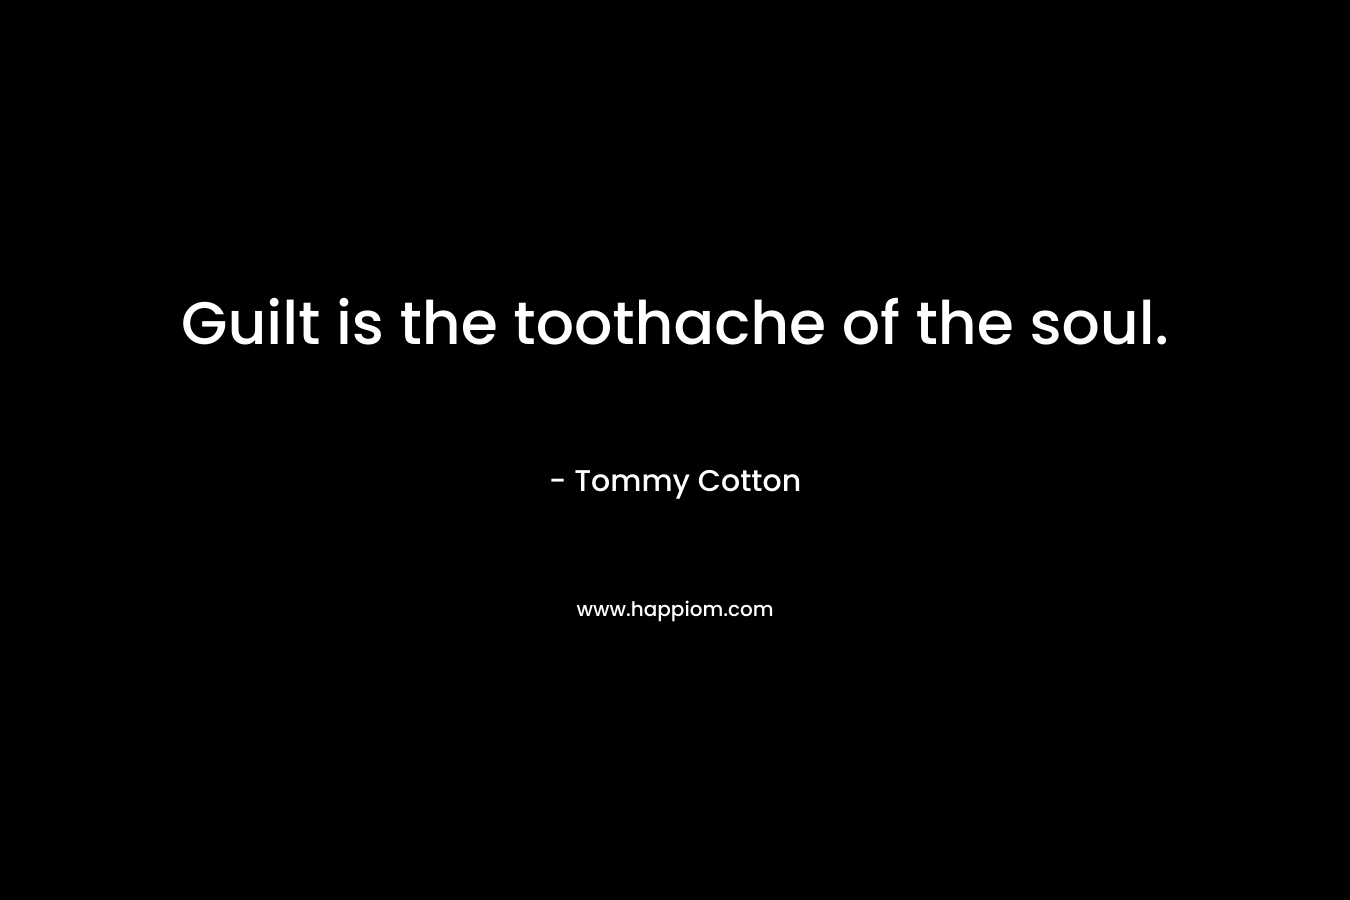 Guilt is the toothache of the soul. – Tommy Cotton